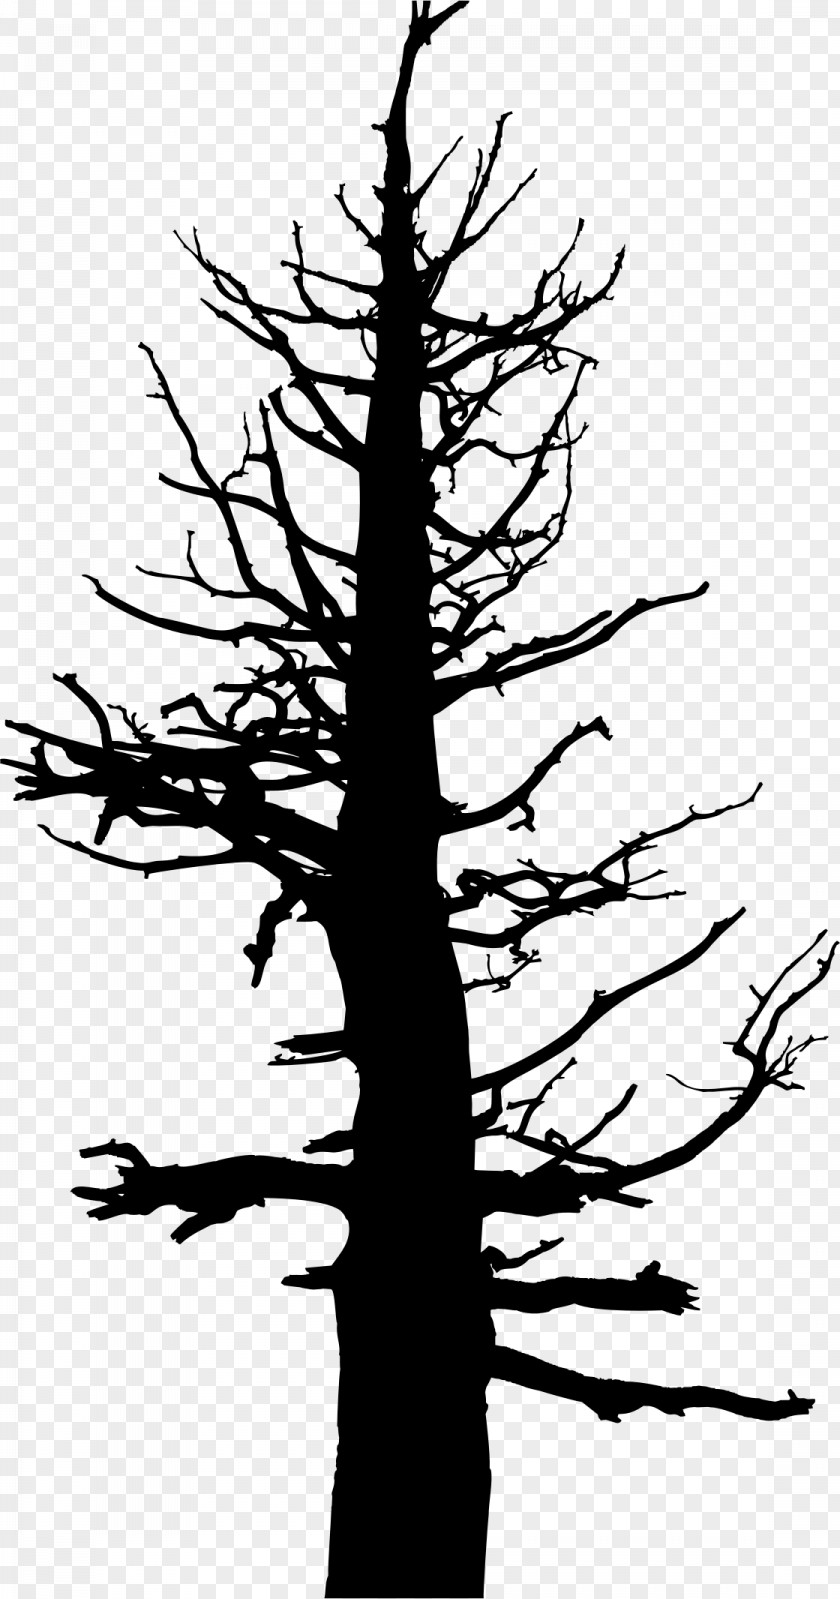 Tree Trunk Drawing Silhouette Snag Clip Art PNG